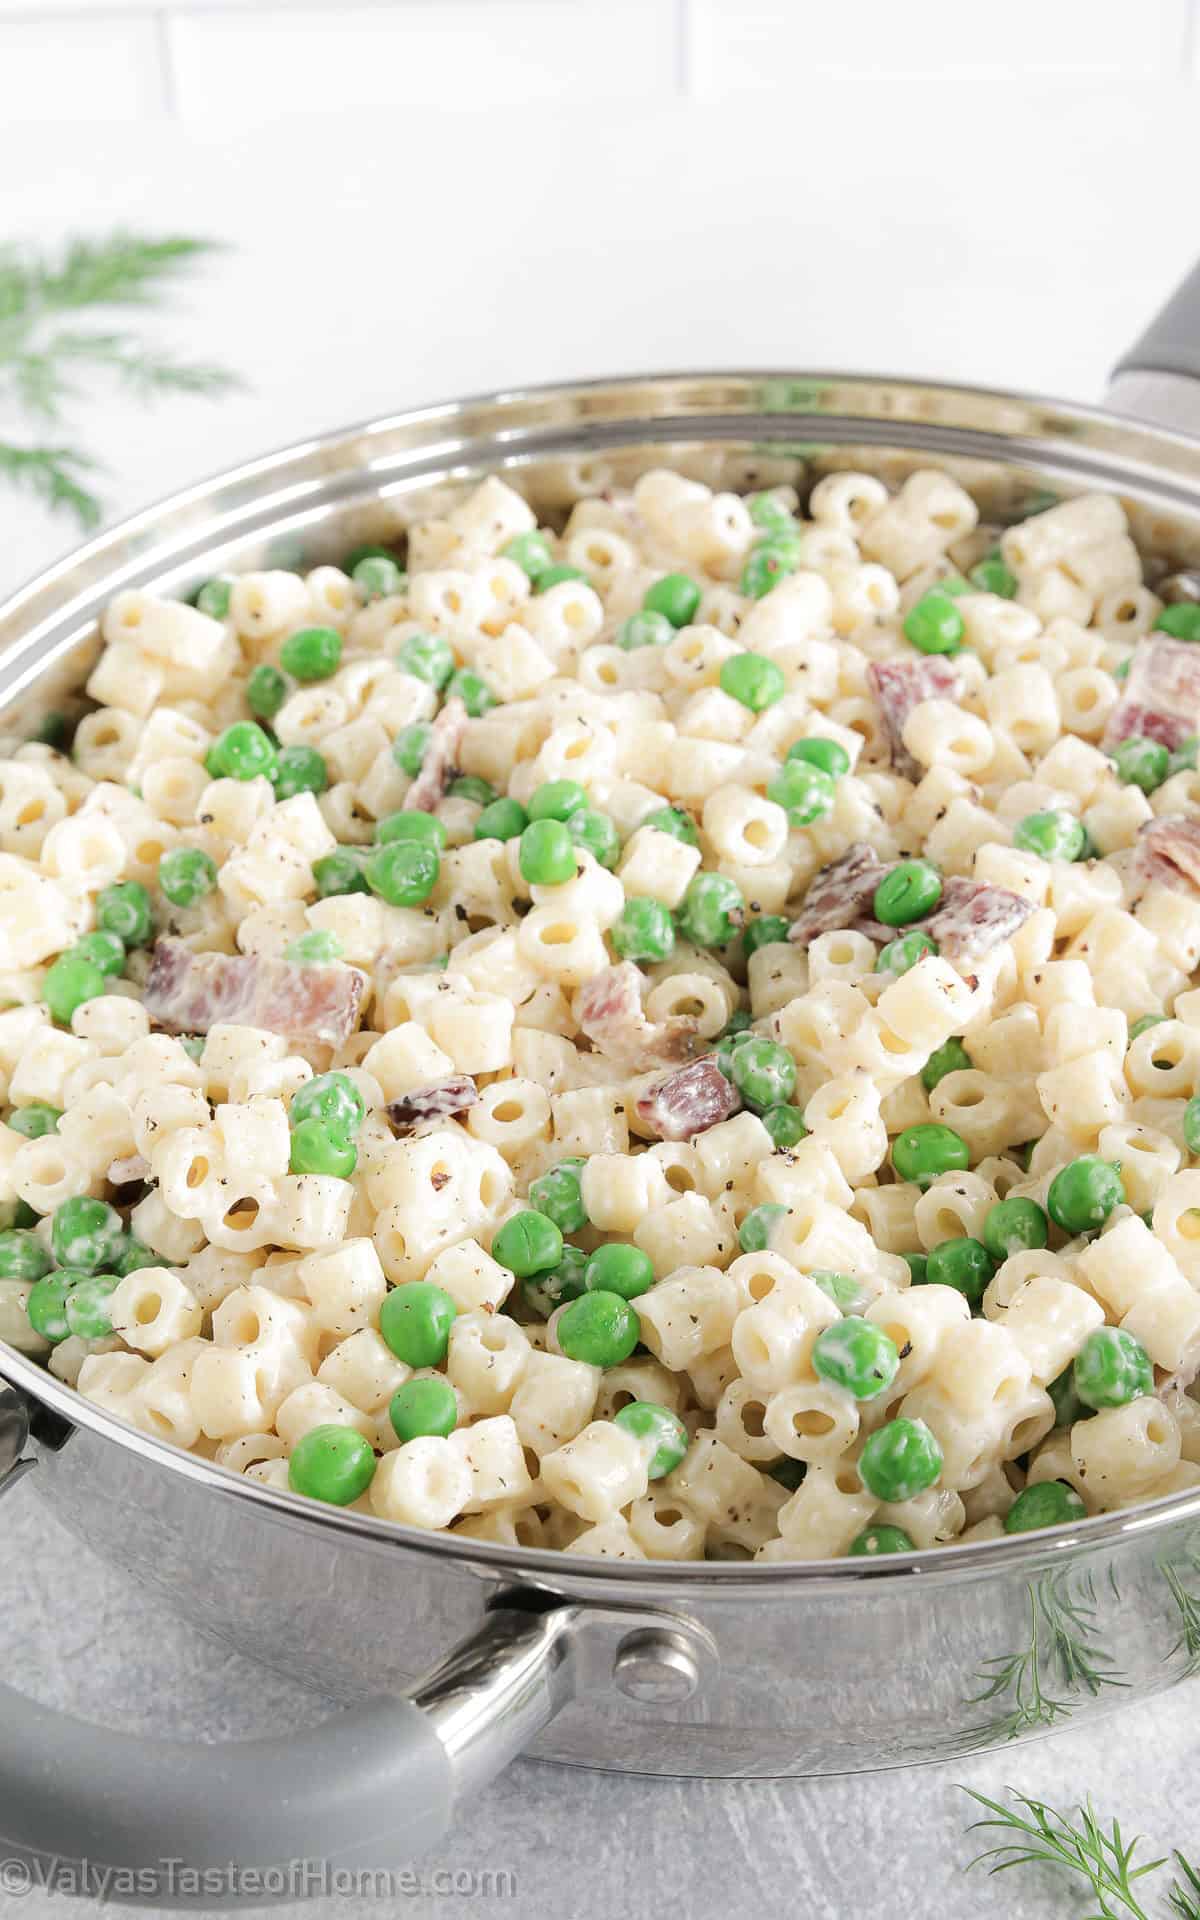 This creamy pasta with bacon and peas is the perfect weeknight meal and can be made in under 30 minutes! Plus, kids absolutely love the flavor!